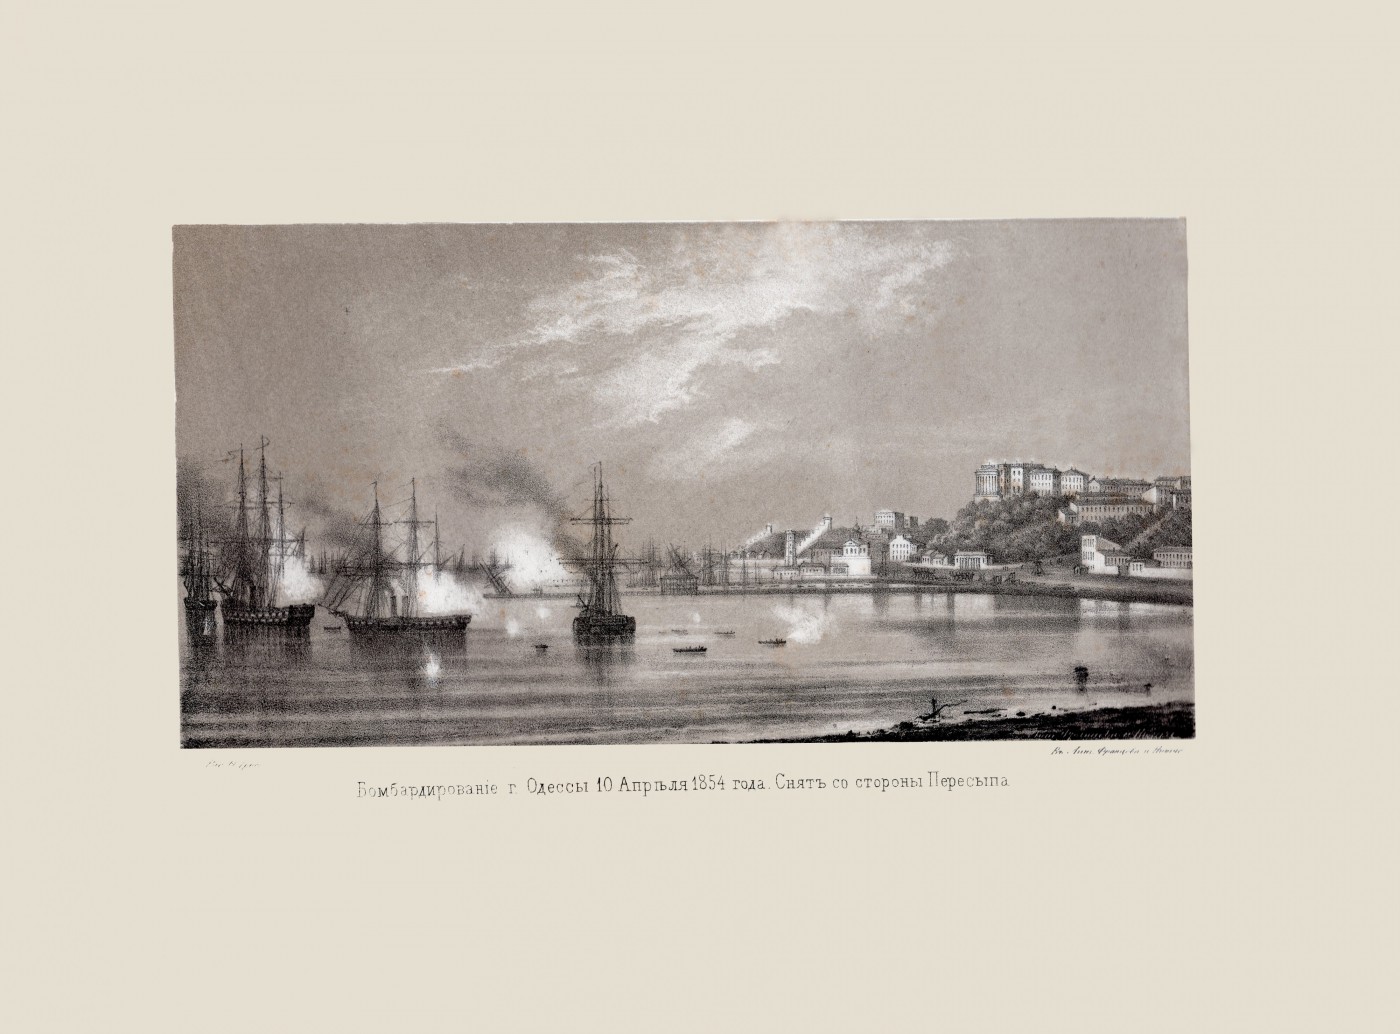 Views of Odesa. [Album]. Bombing of Odesa on 10 April 1854. View from the side of Peresyp. Mid-1850s. 